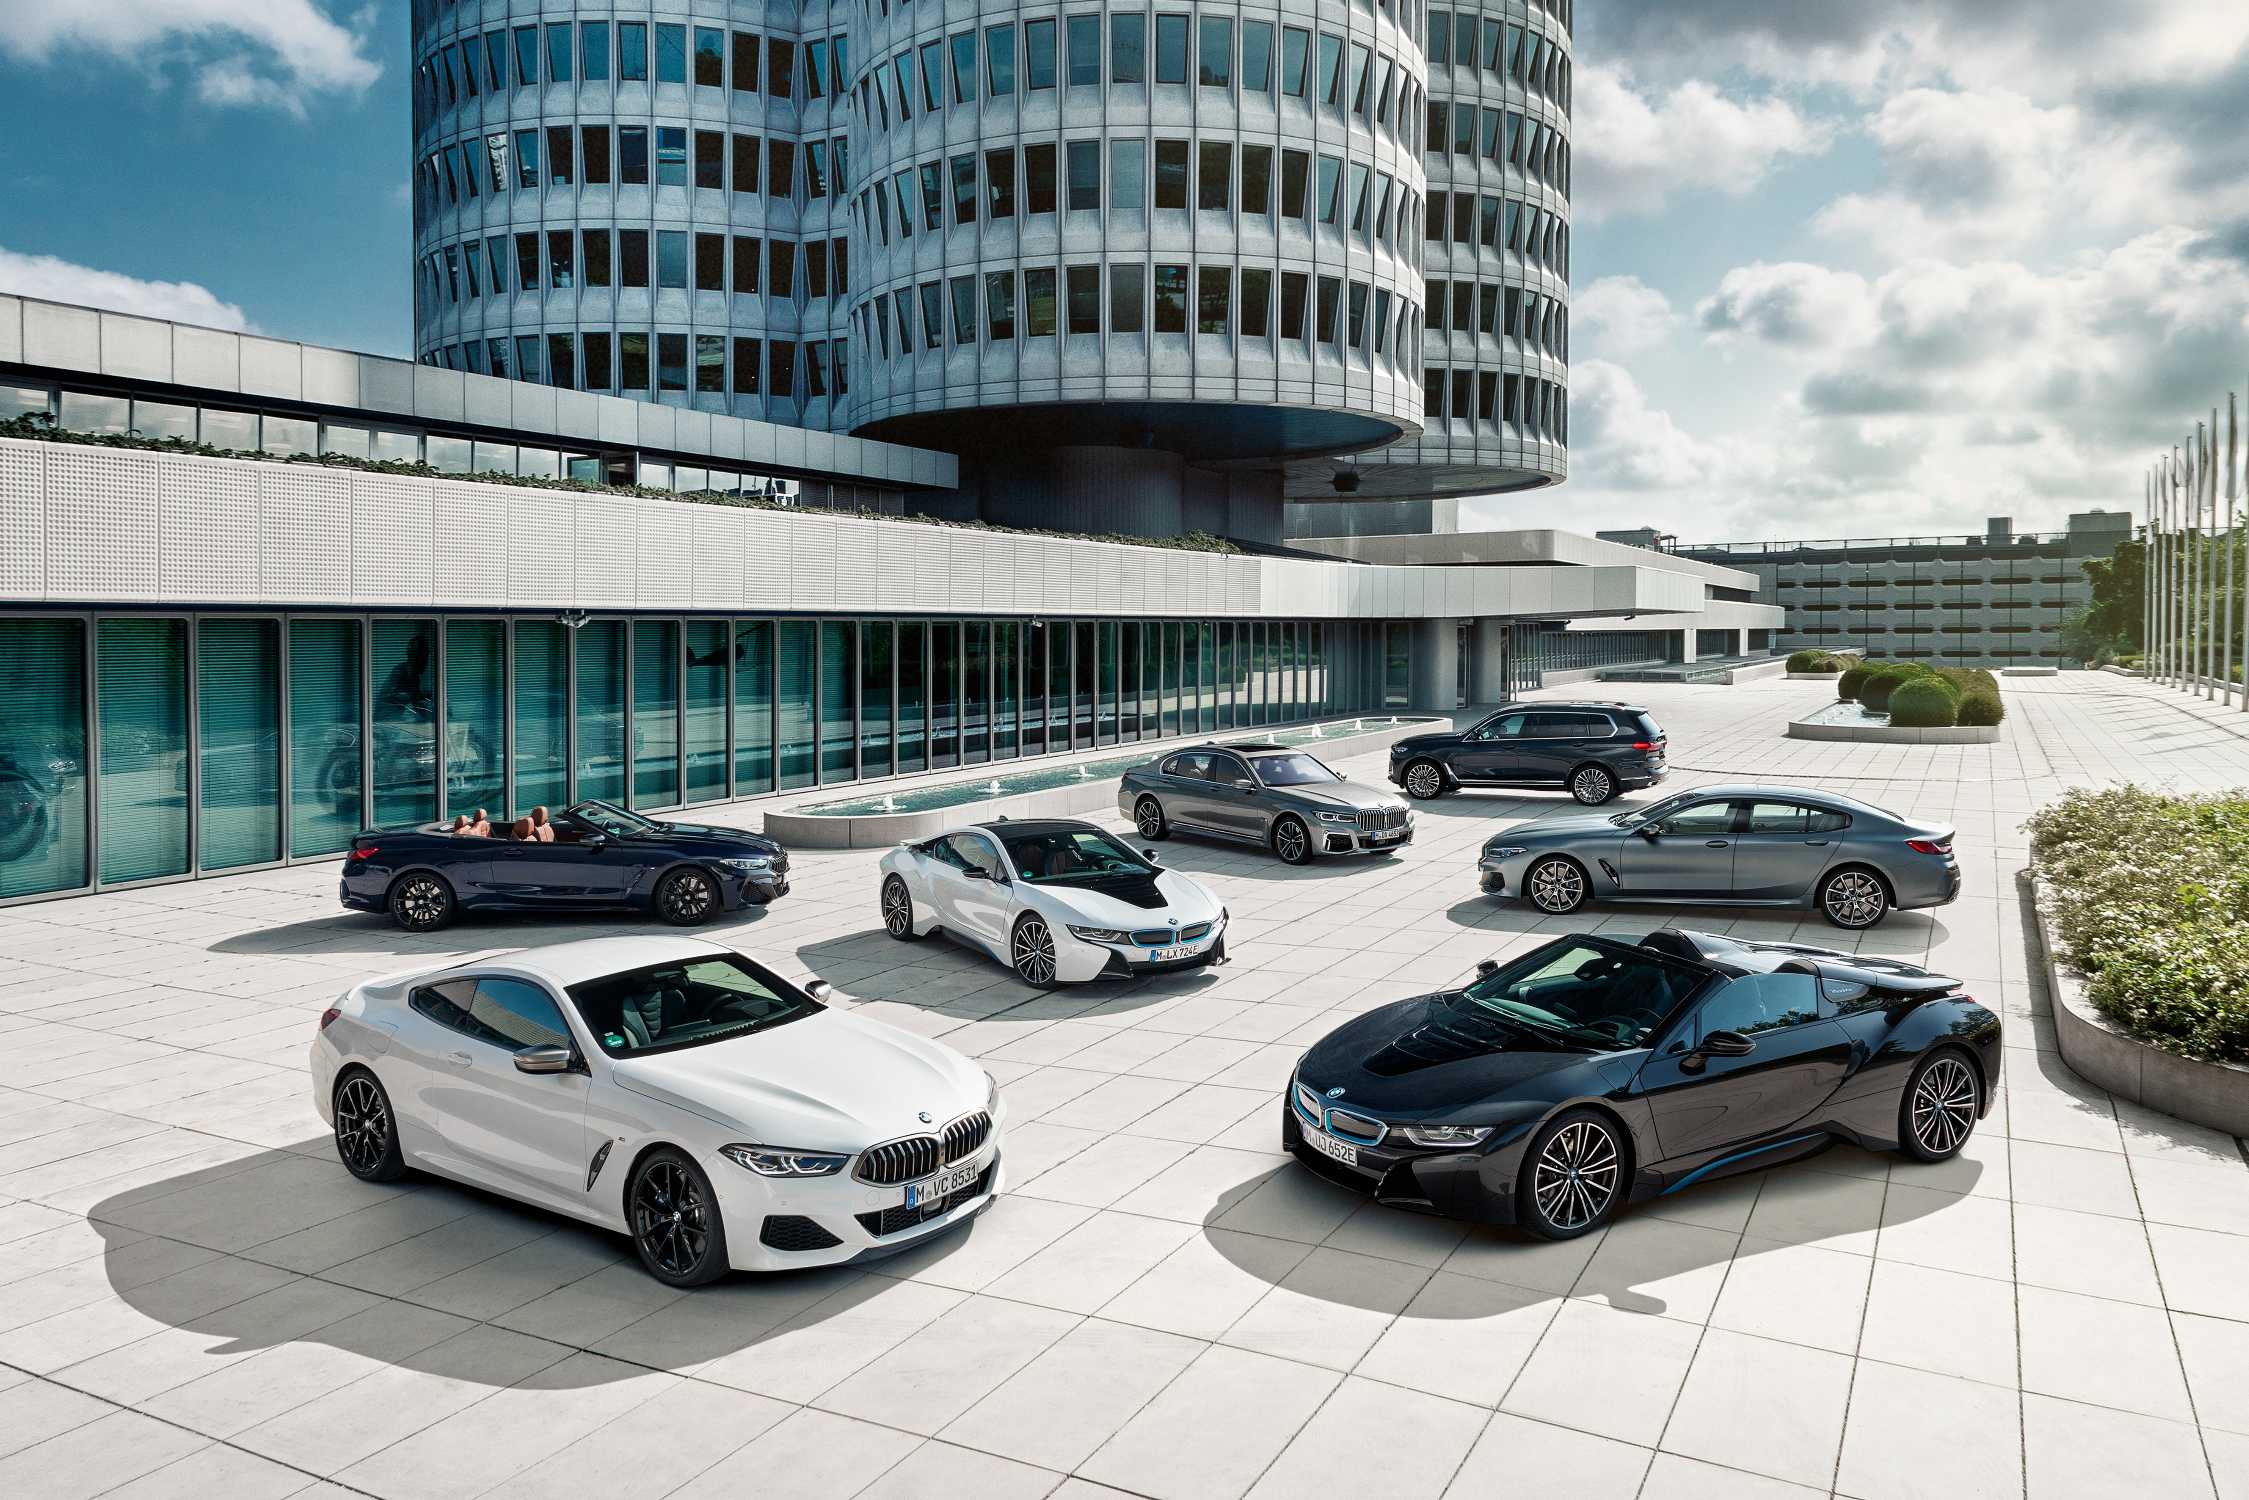 New All Time High For Bmw Group Deliveries In 2019 Confirms Position As World S Leading Premium Car Company